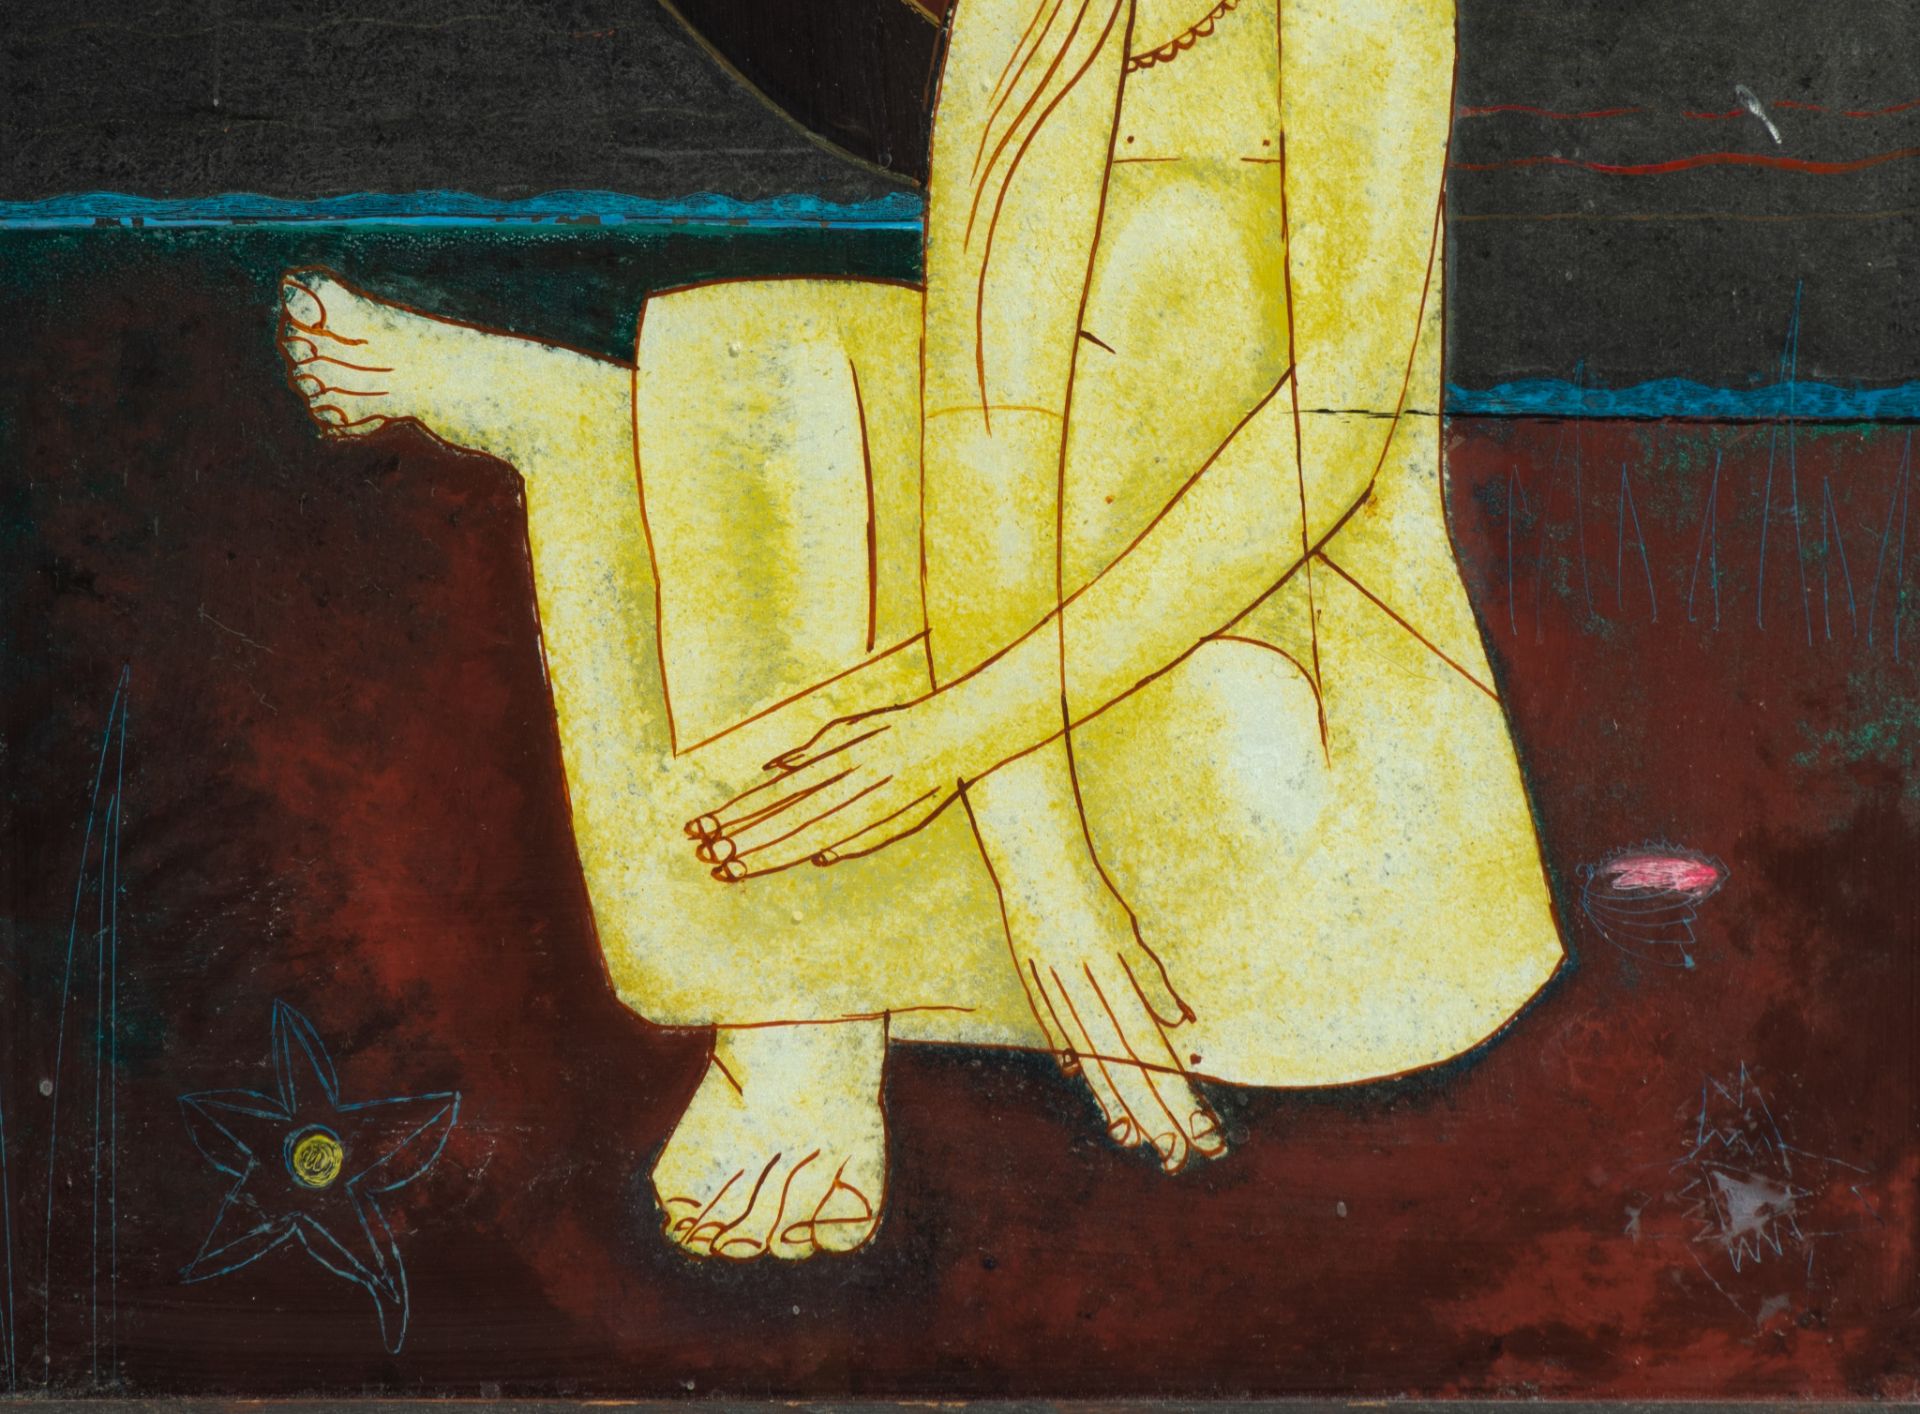 Floris Jespers (1889-1965), 'Femme assise (Coquillage)', eglomise, 35 x 43 cm - Image 5 of 5